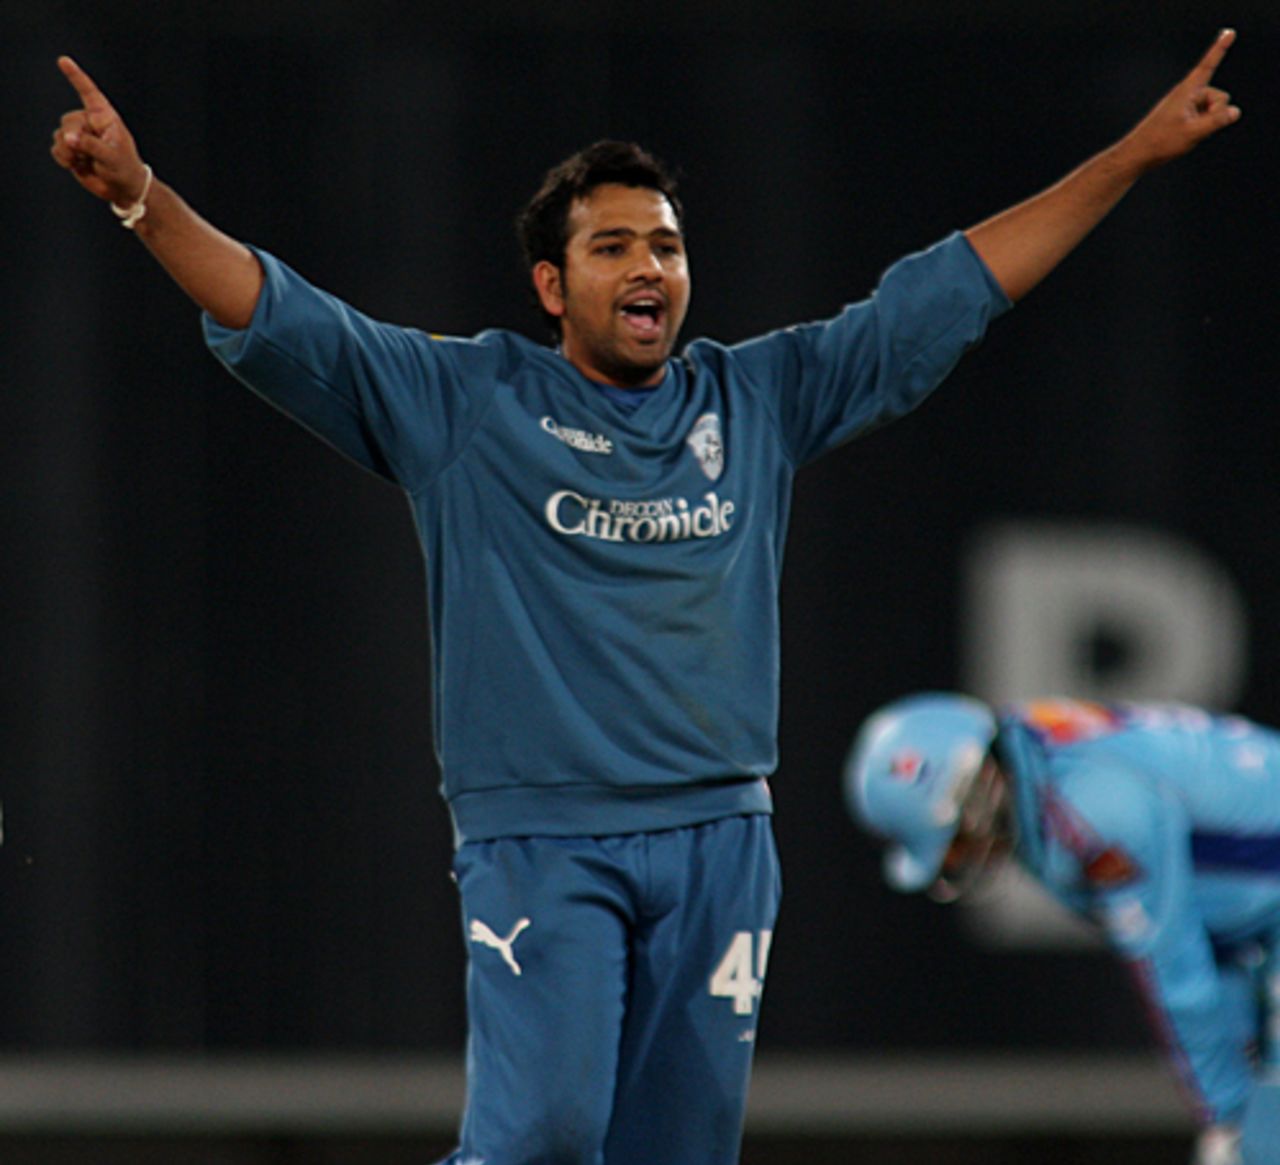 Rohit Sharma ended with an amazing 4 for 6, Deccan Chargers v Mumbai Indians, IPL, 32nd match, Centurion, May 6, 2009